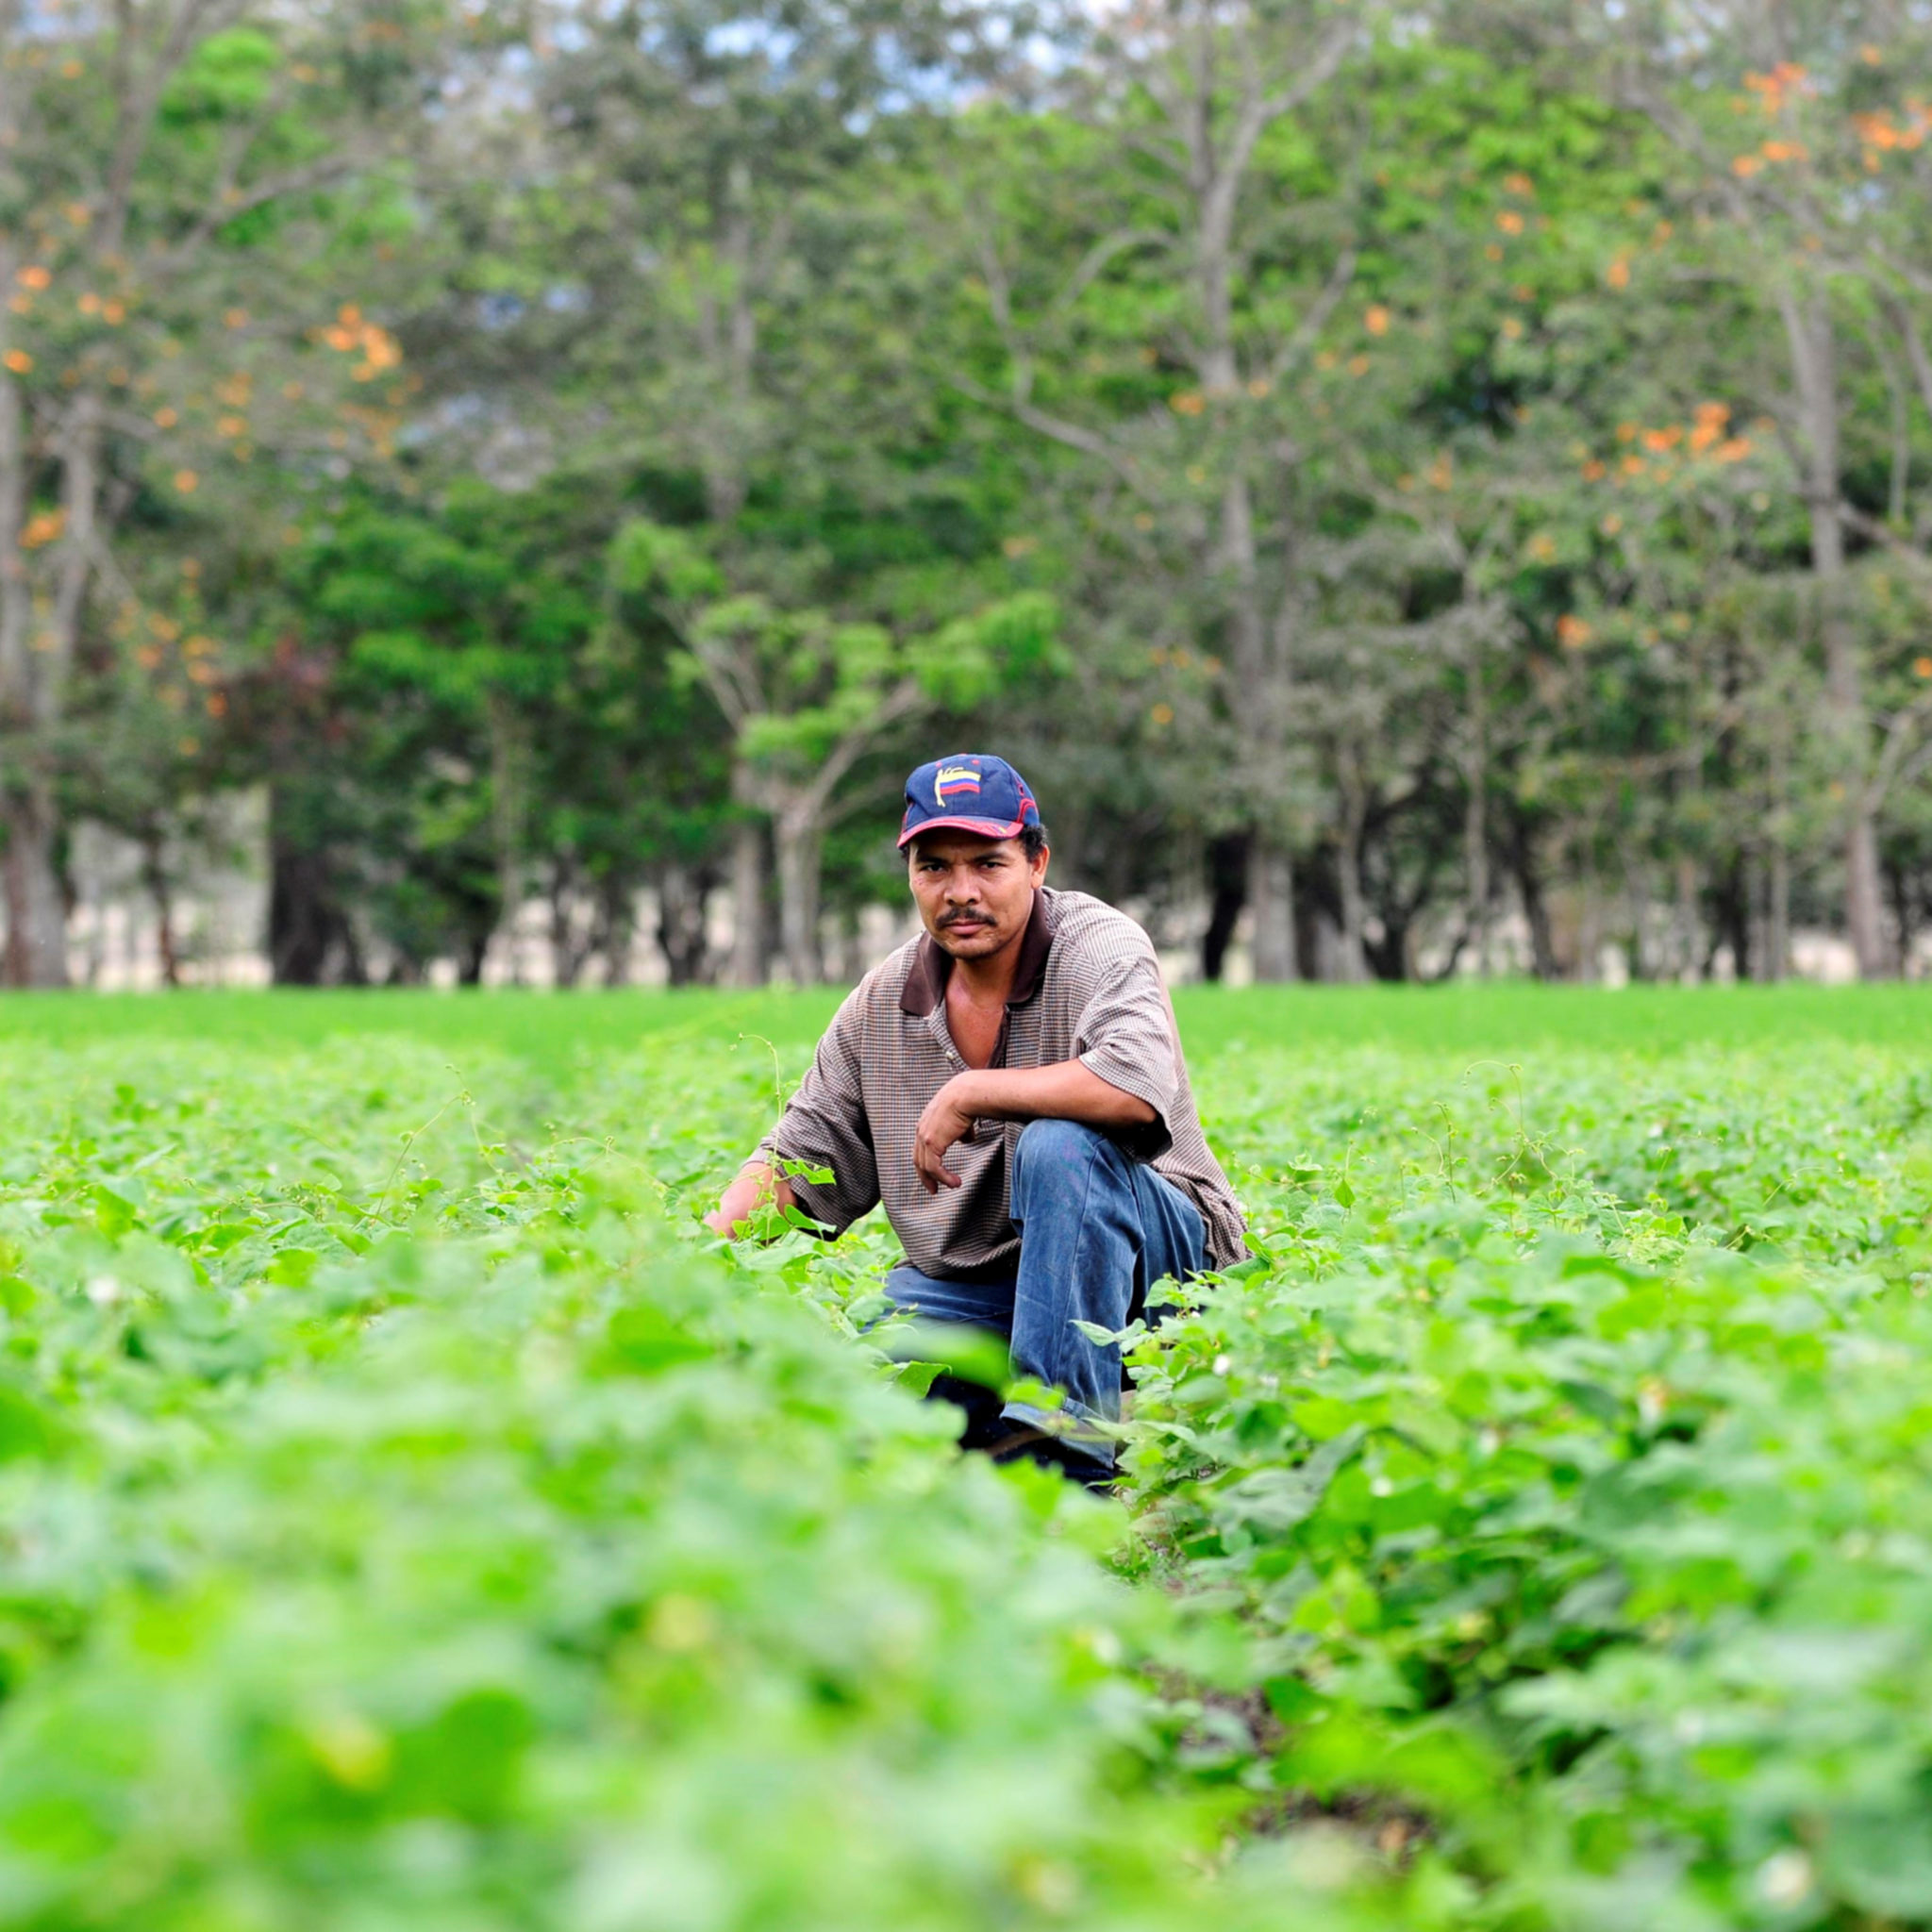 A Nicaraguan man squats in a field full of bean plants, looking at the camera